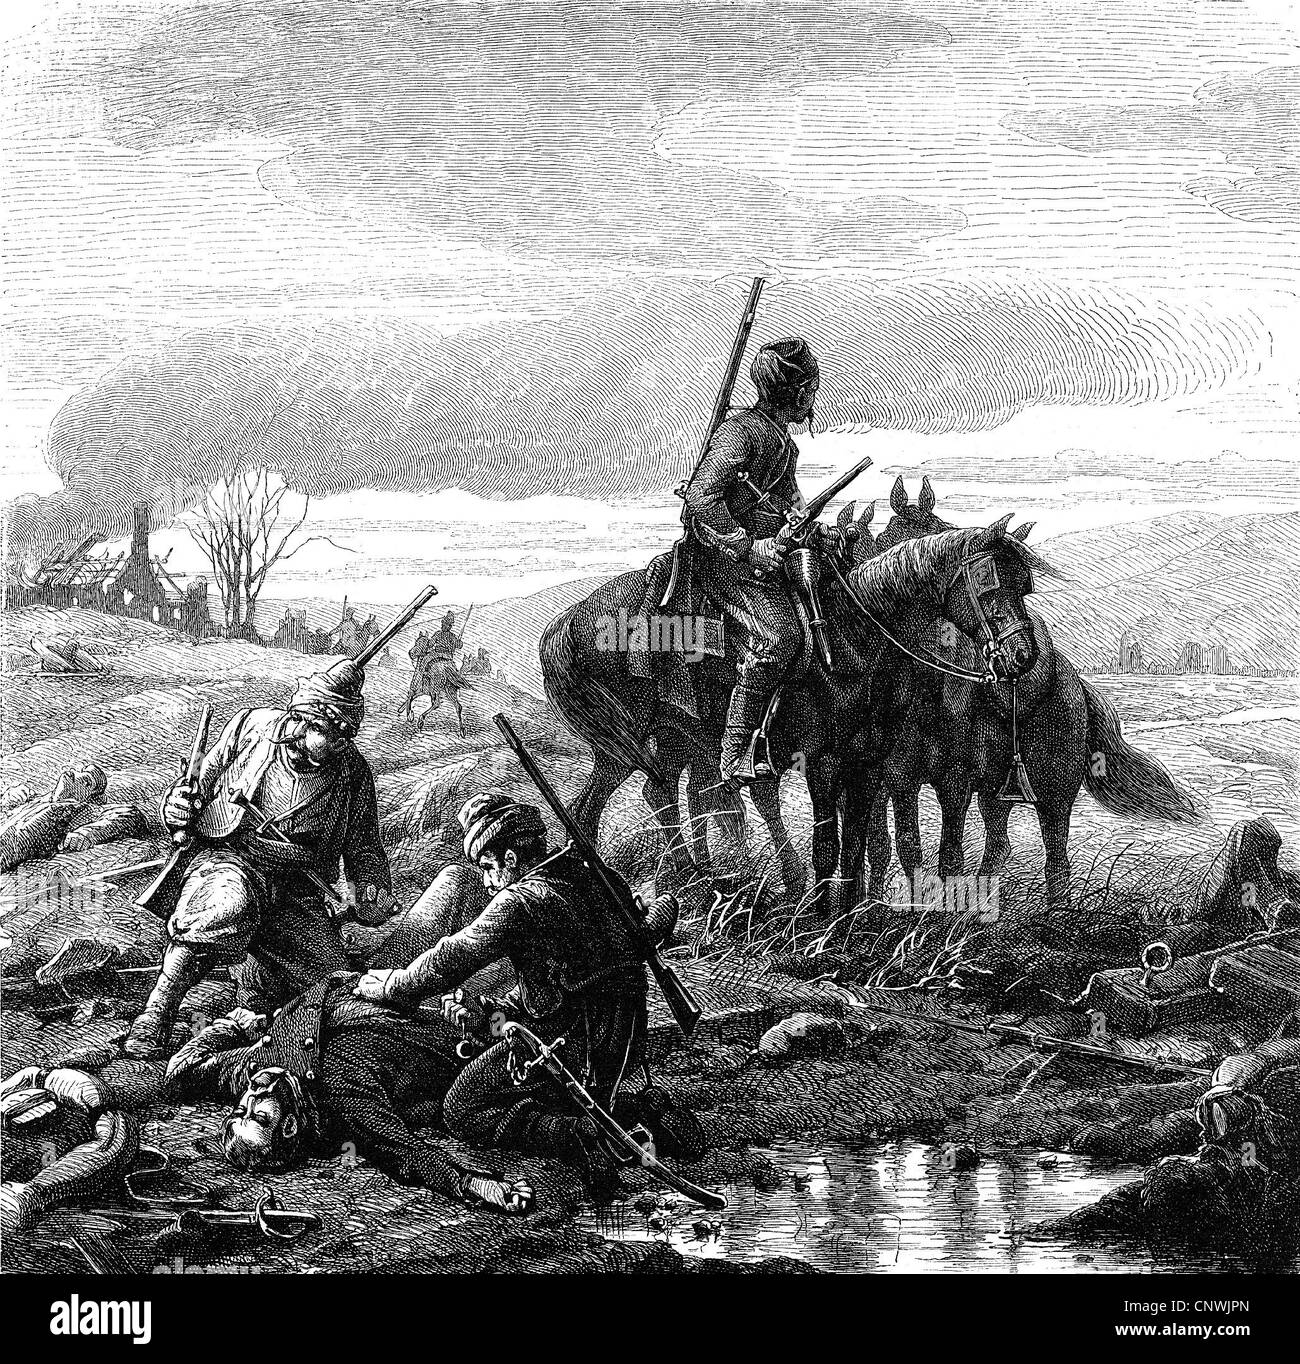 events, Russo-Turkish War (1877  1878), Turkish cavalrymen robbing a dead soldier on the battlefield, wood engraving, 19th century, historic, historical, Russo, Ottoman, stealing, plundering, thiefs, robbers, marauders, body-stripping, death, dead, 19th century, people, Additional-Rights-Clearences-Not Available Stock Photo